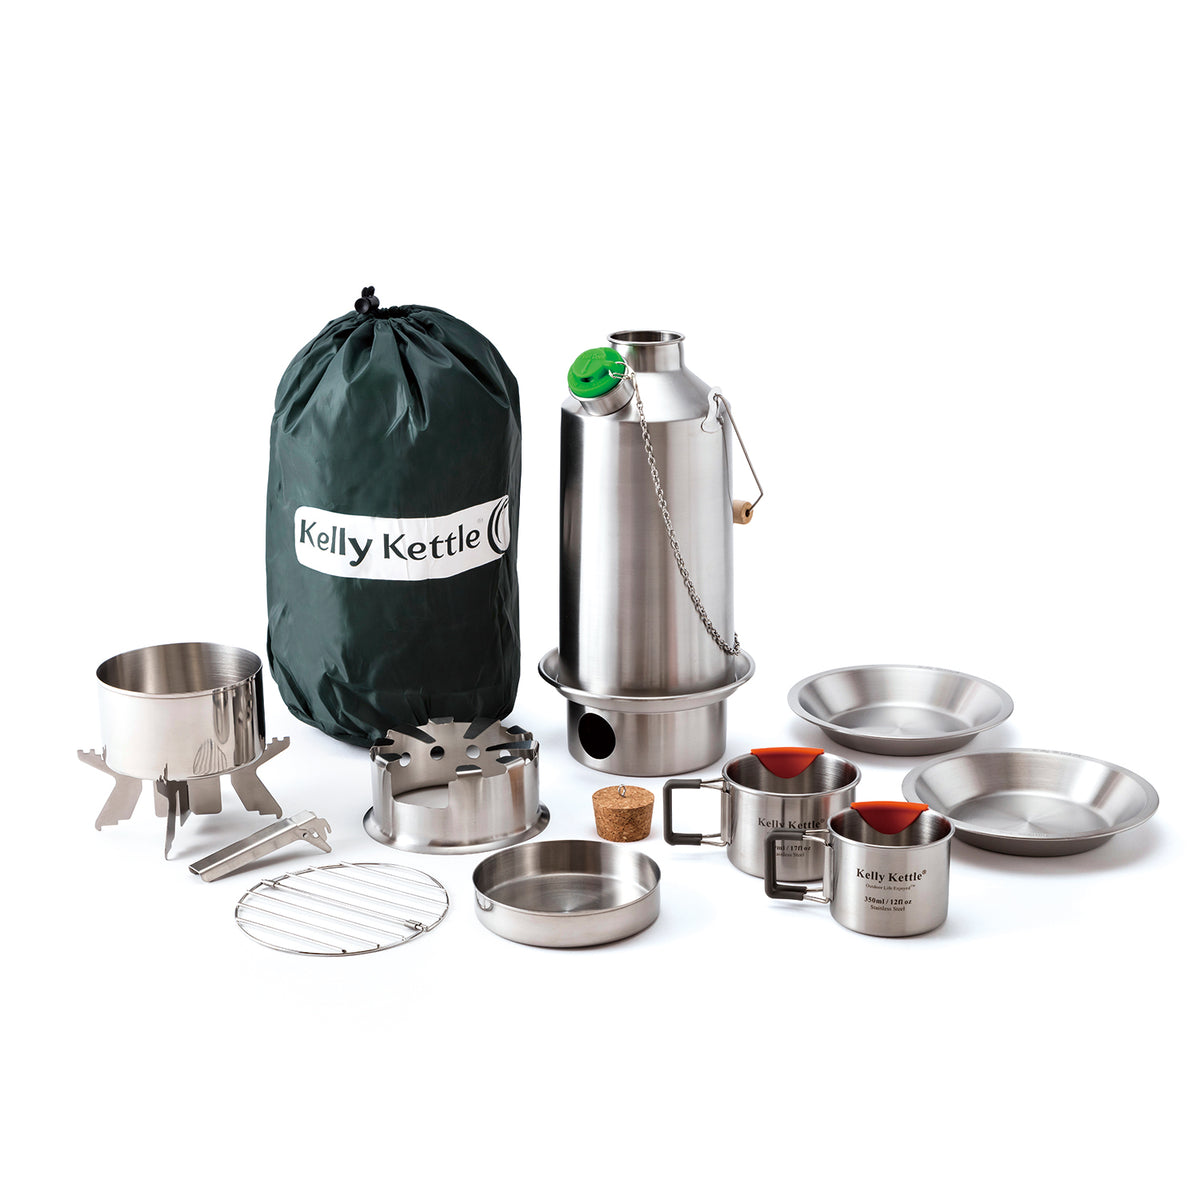 KELLY KETTLE BASECAMP ULTIMATE KIT 1.6L STAINLESS ...